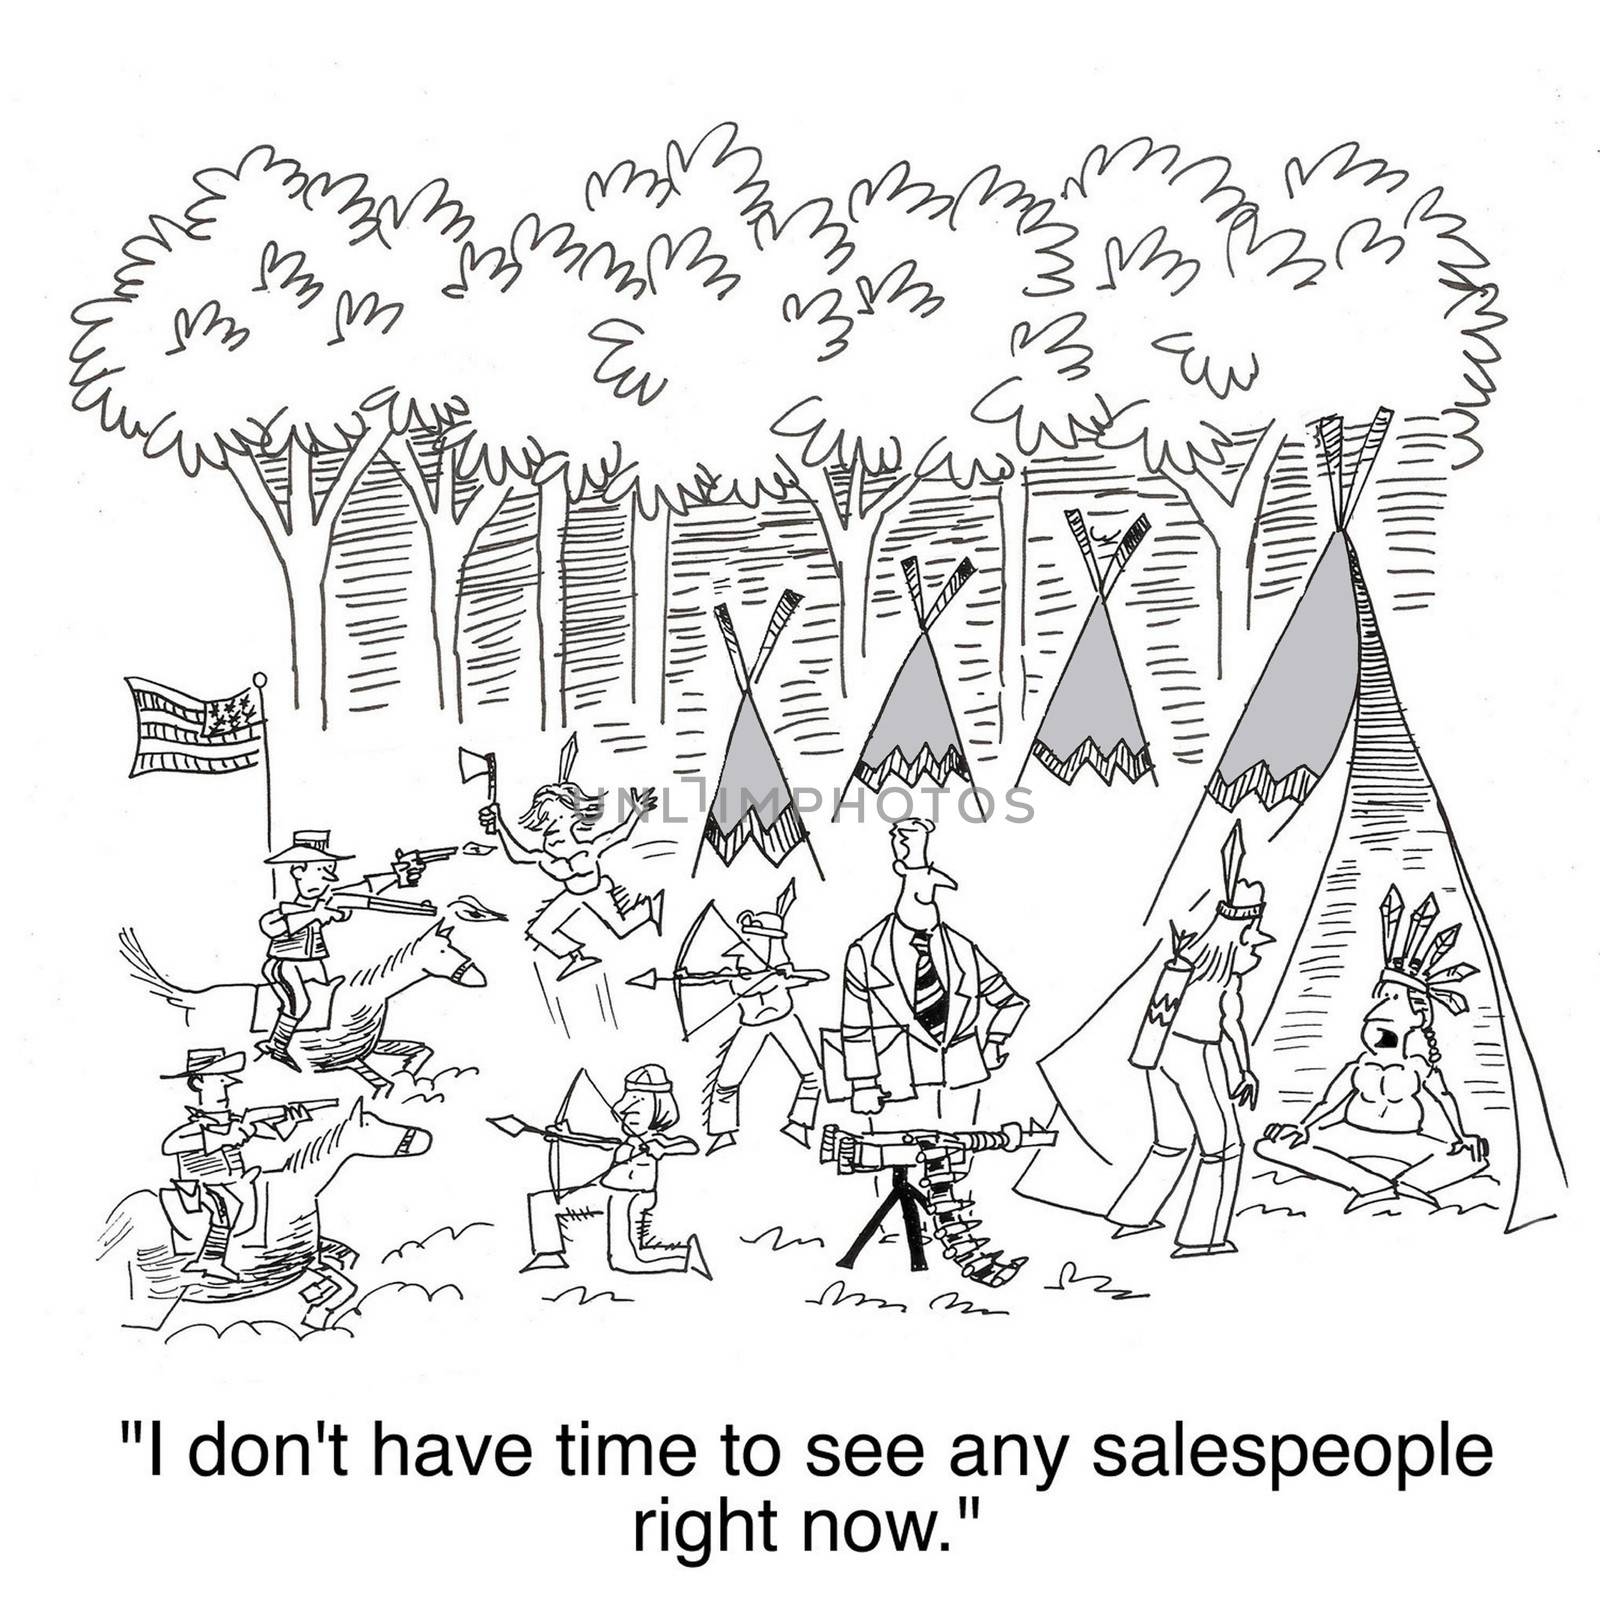 "I don't have time to see any salespeople right now."